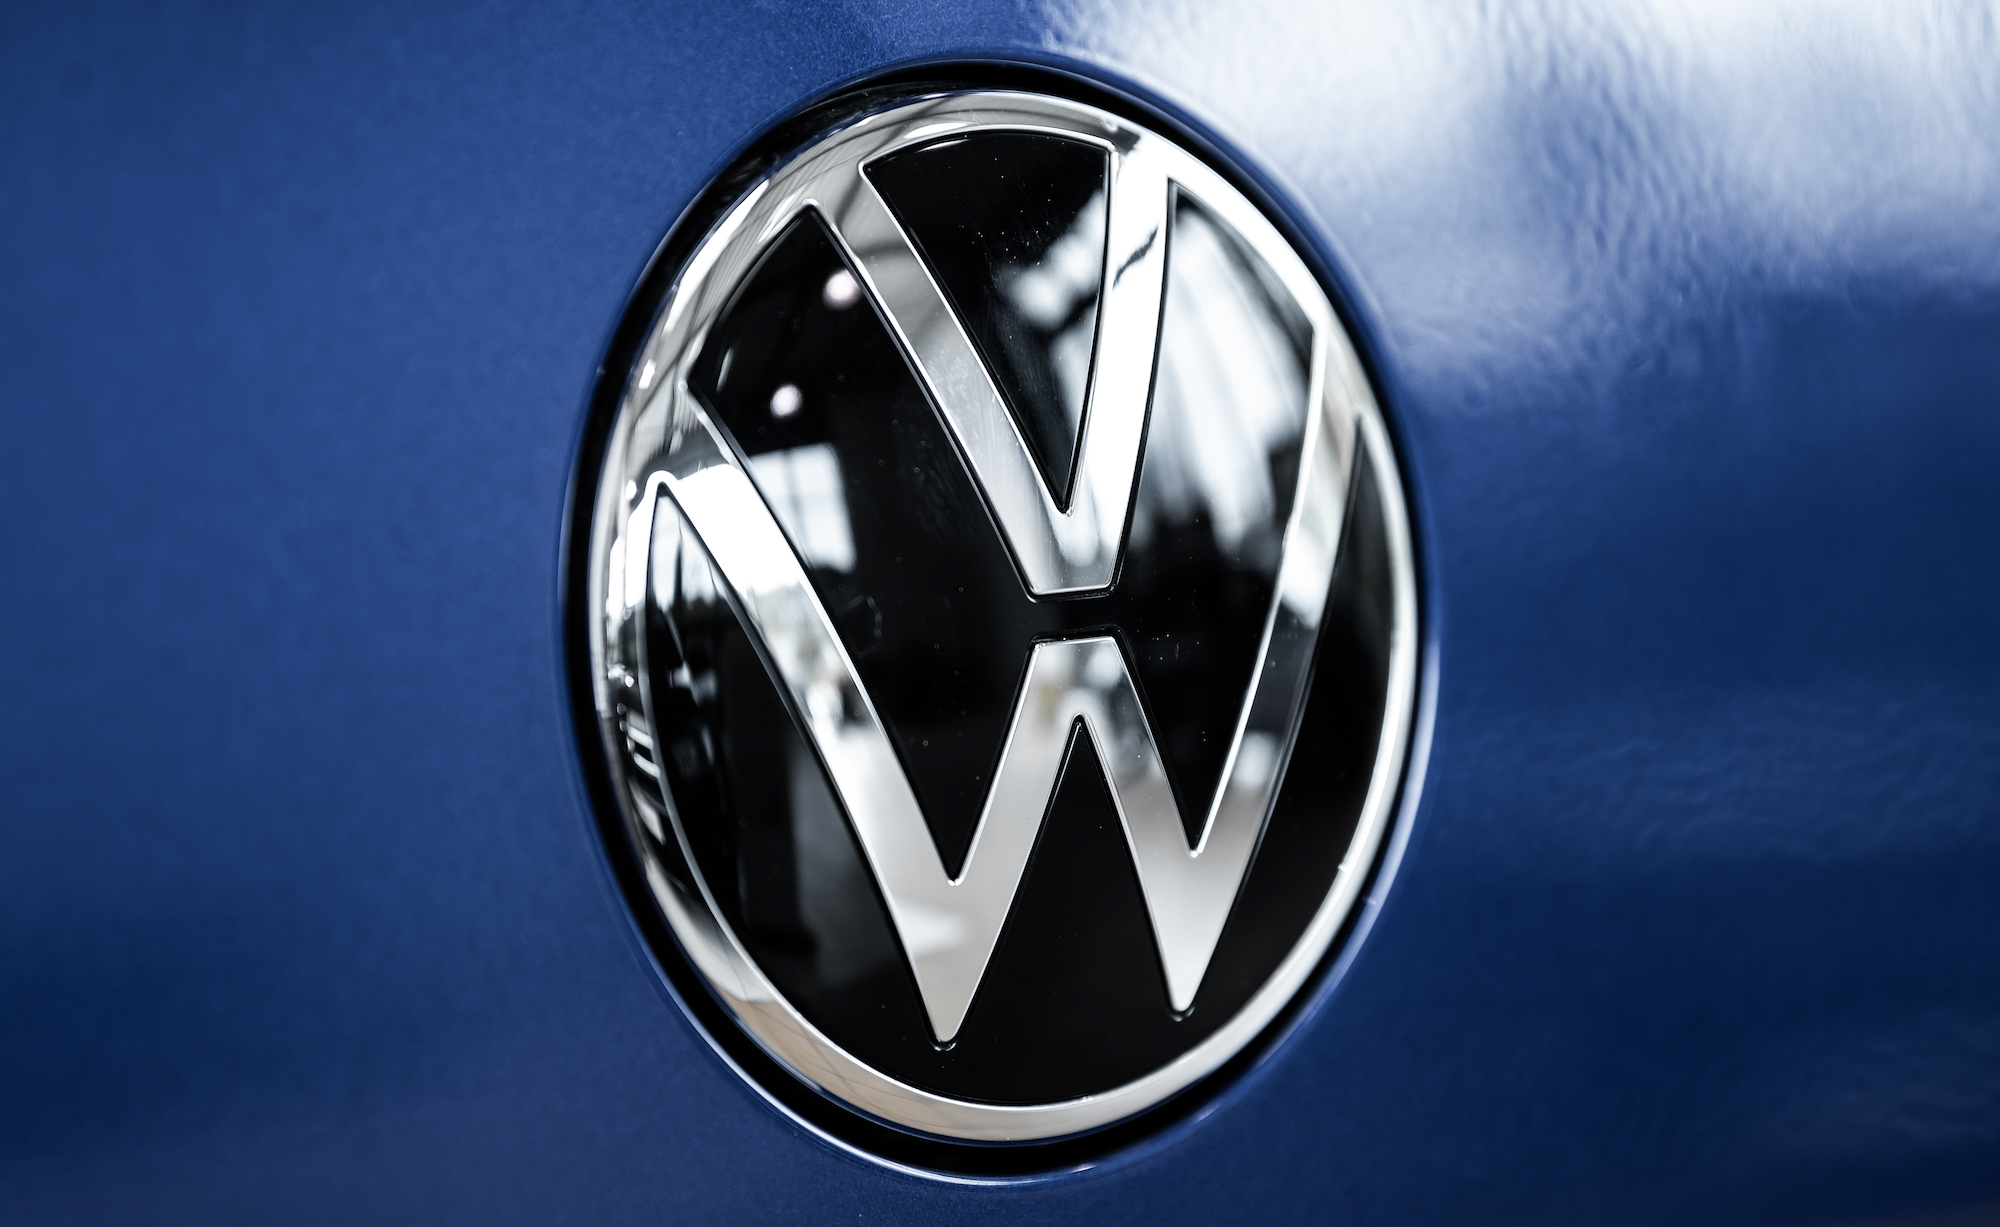 A Volkswagen logo, which owns various brands.